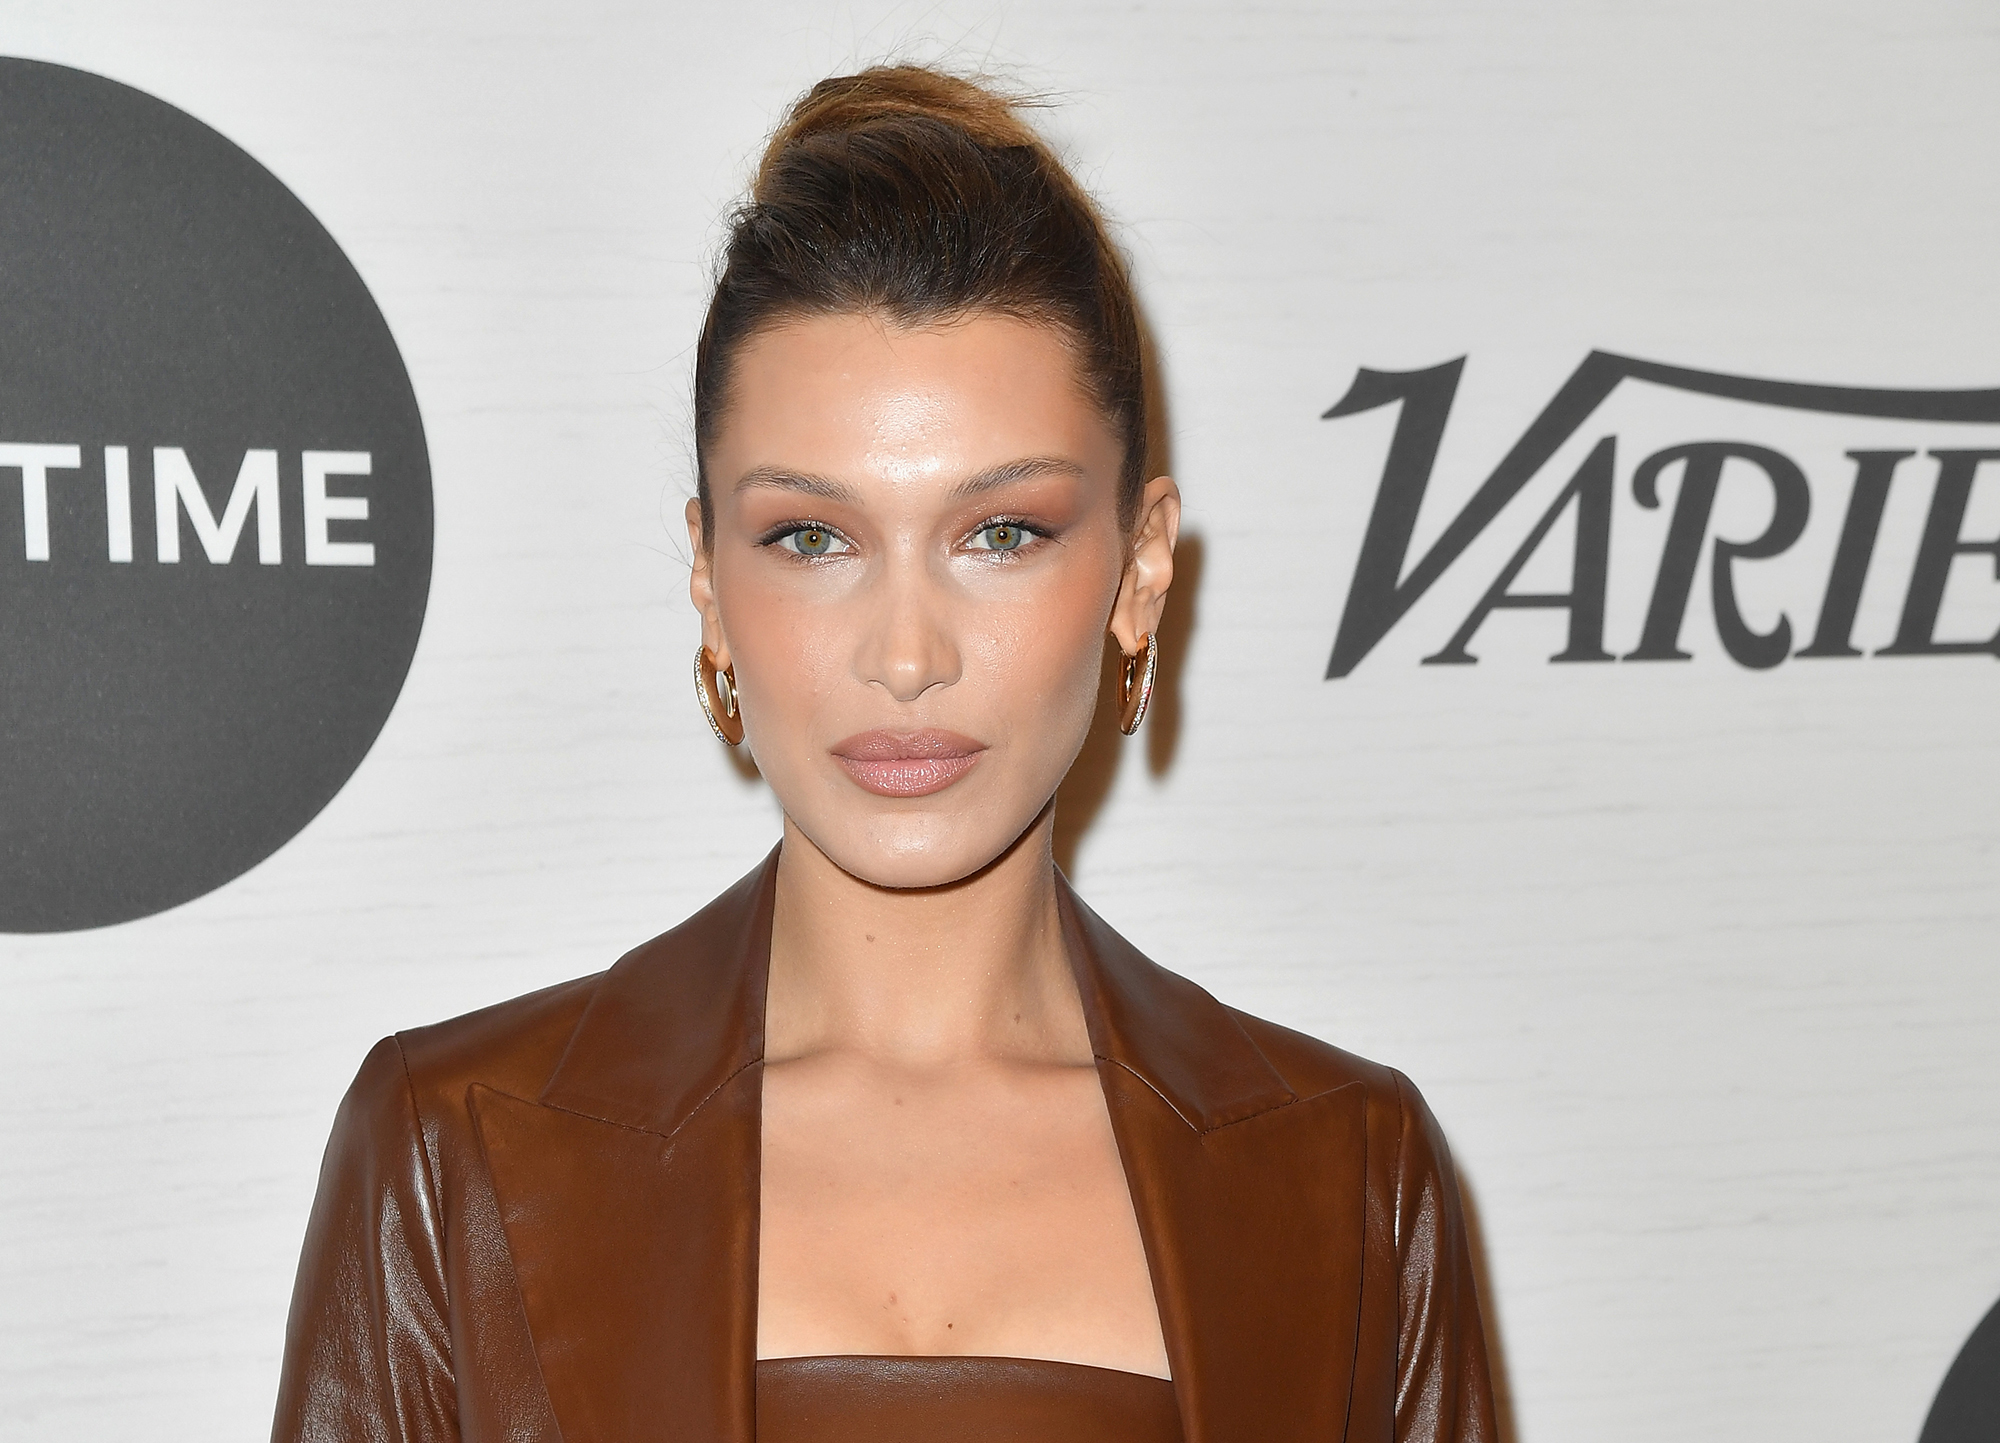 Bella Hadid Shares Favorite Bath Products, Including a $6 Body Wash